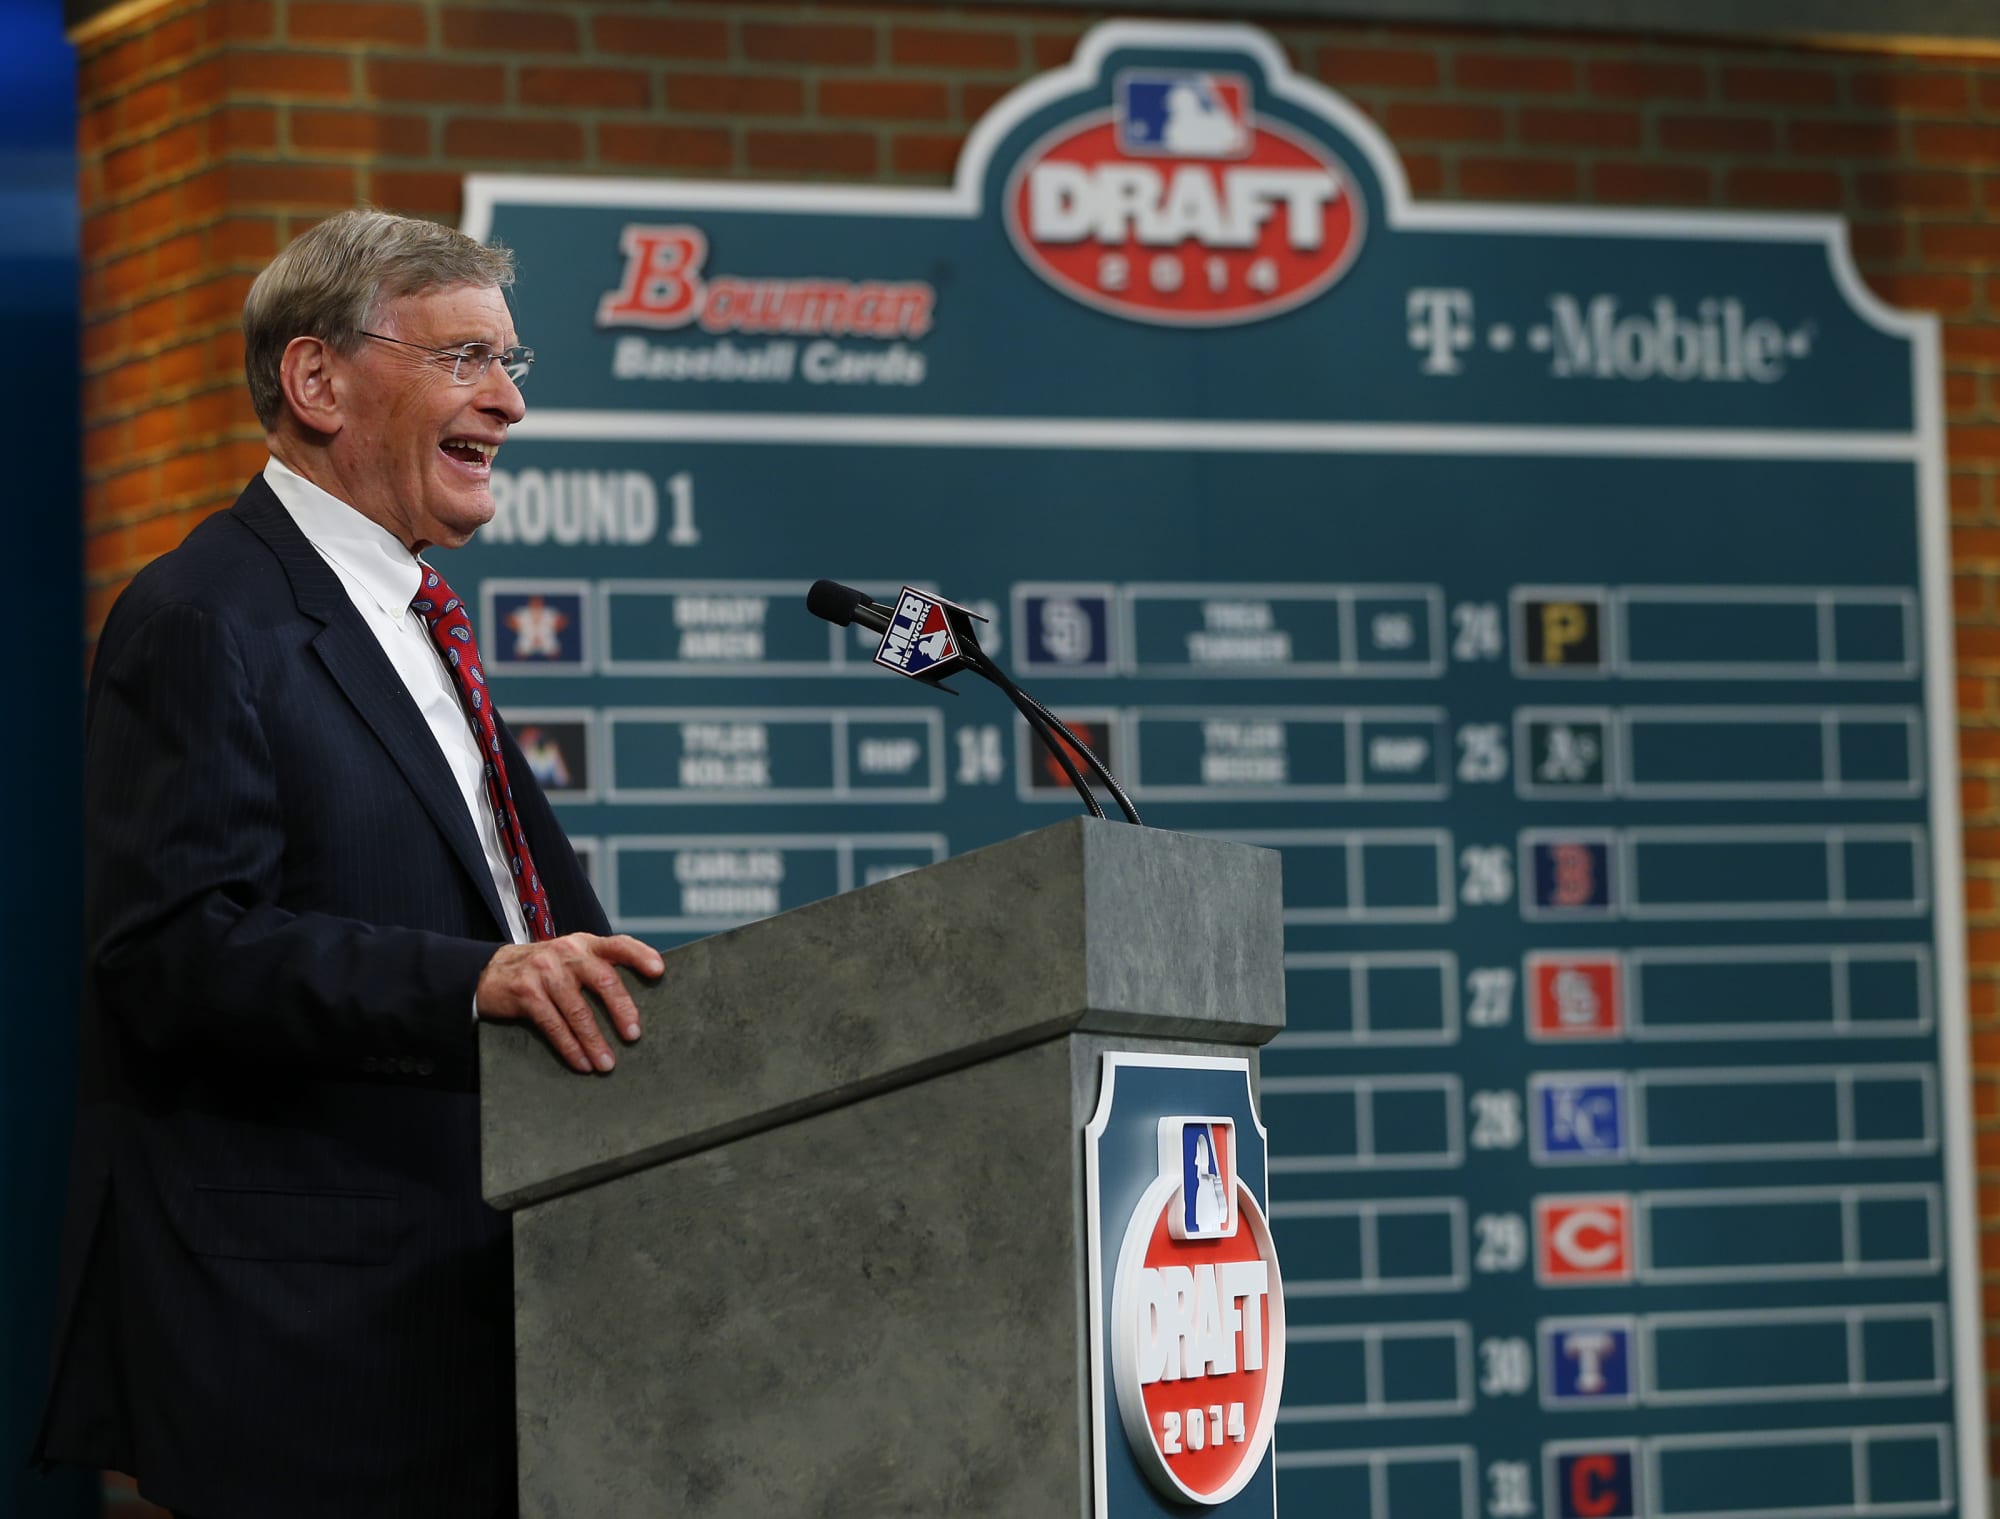 Blue Jays expected to sign their Top 10 draft selections